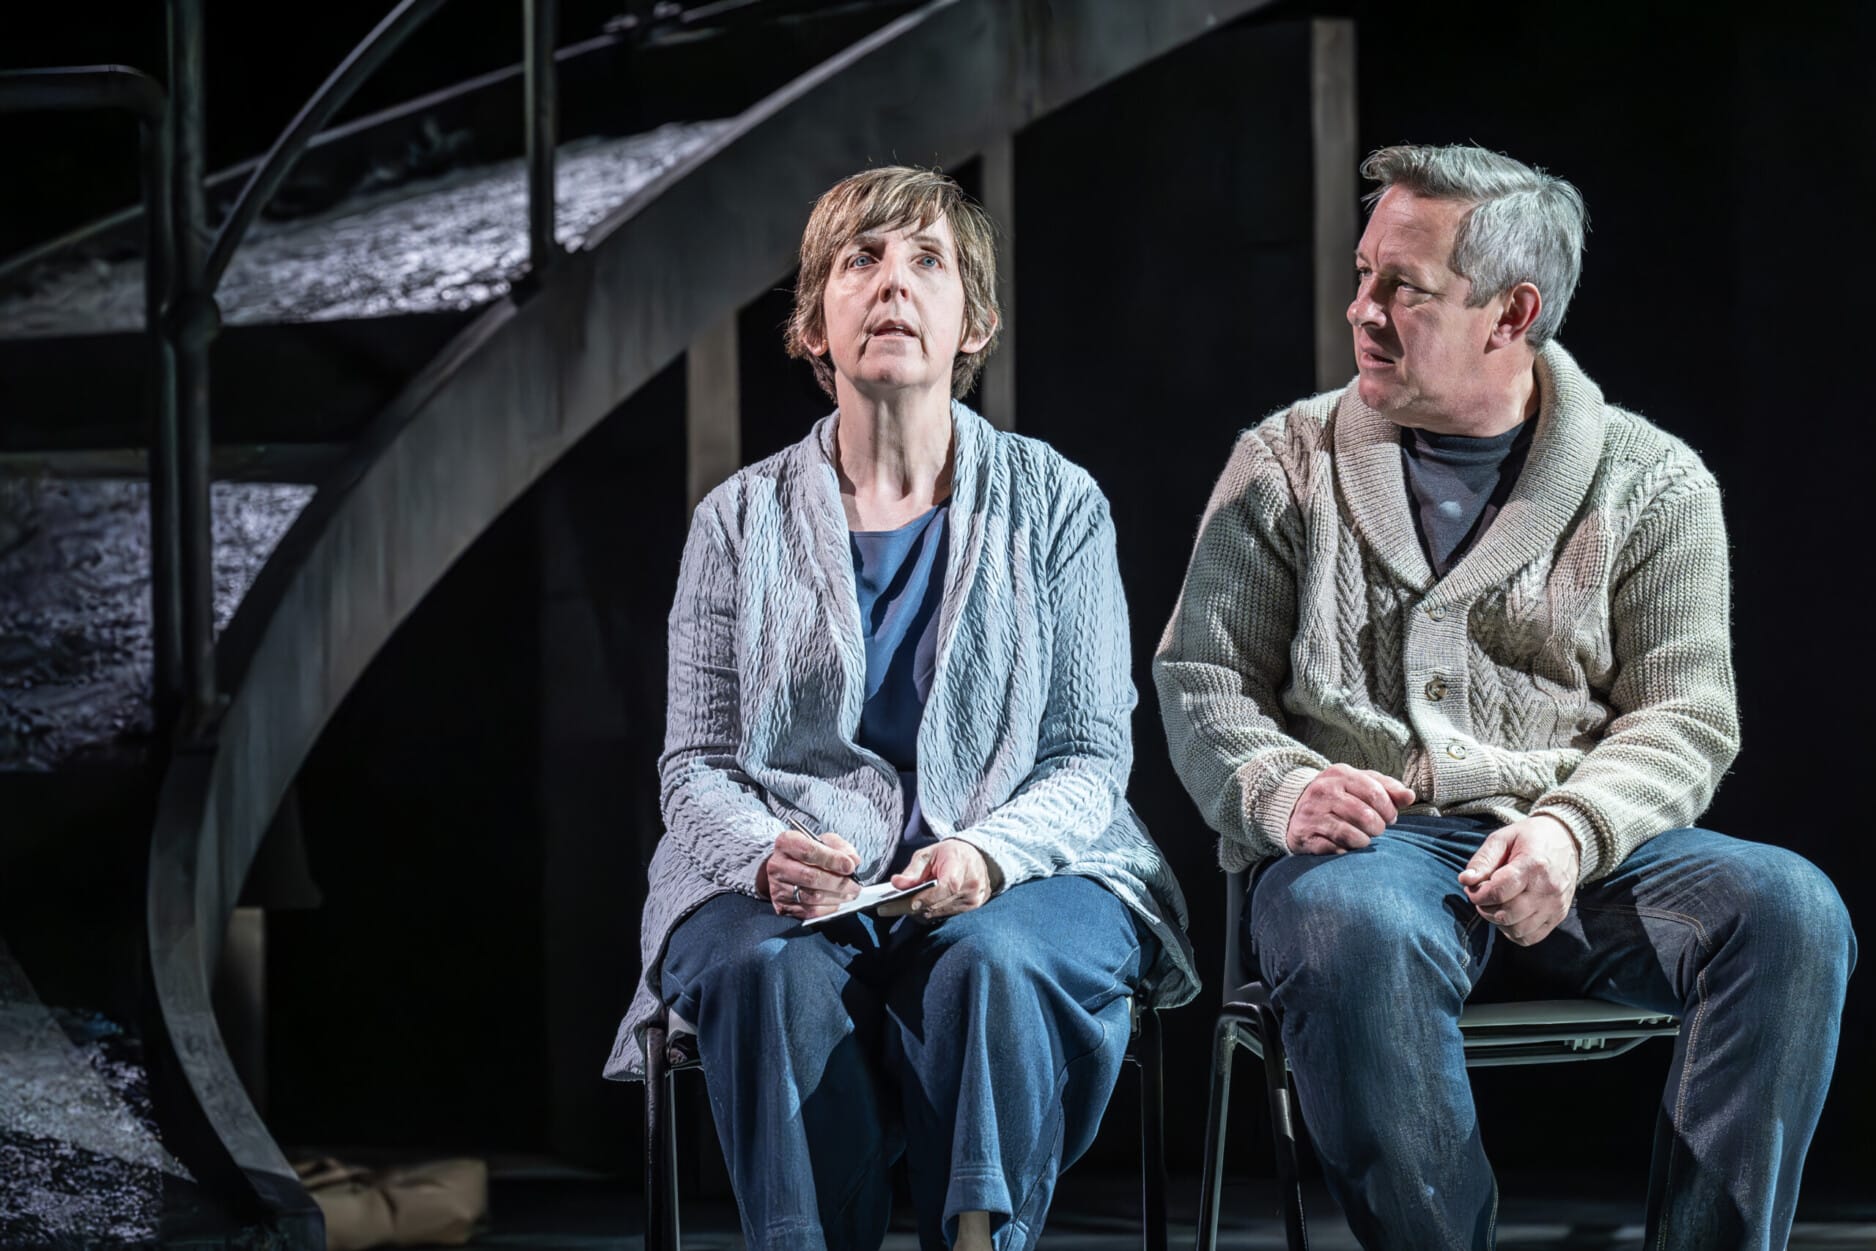 Julie Hesmondhalgh as Joan and Tony Hirst as David in Punch. Photo by Marc Brenner.